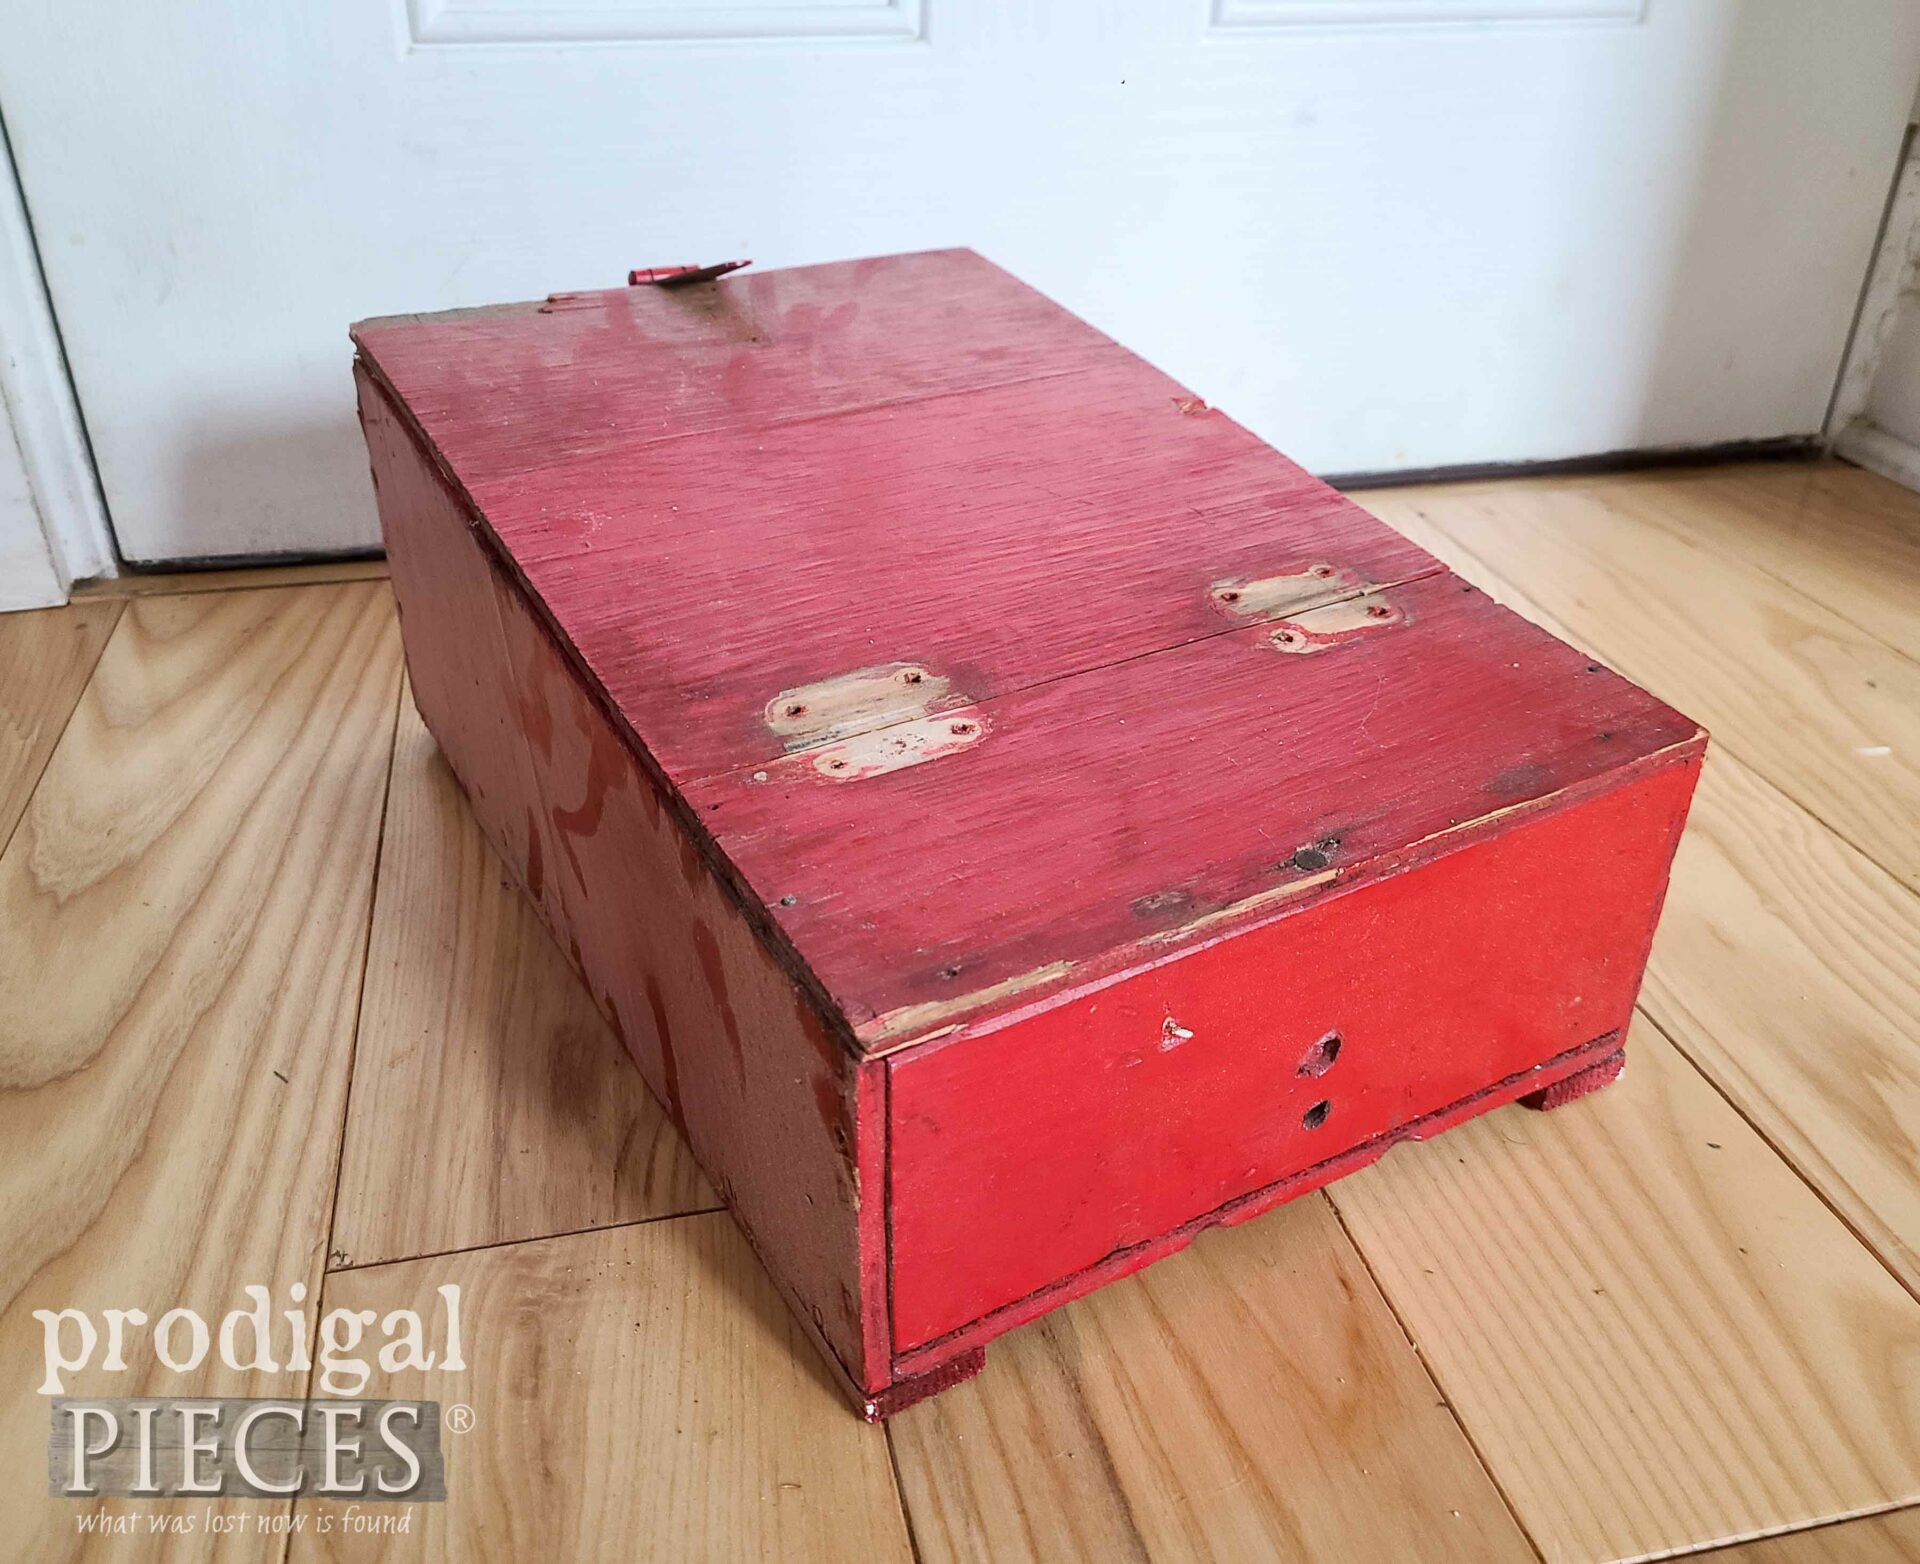 Side View of Vintage Red Box for Antique Medical Box | prodigalpieces.com #prodigalpieces